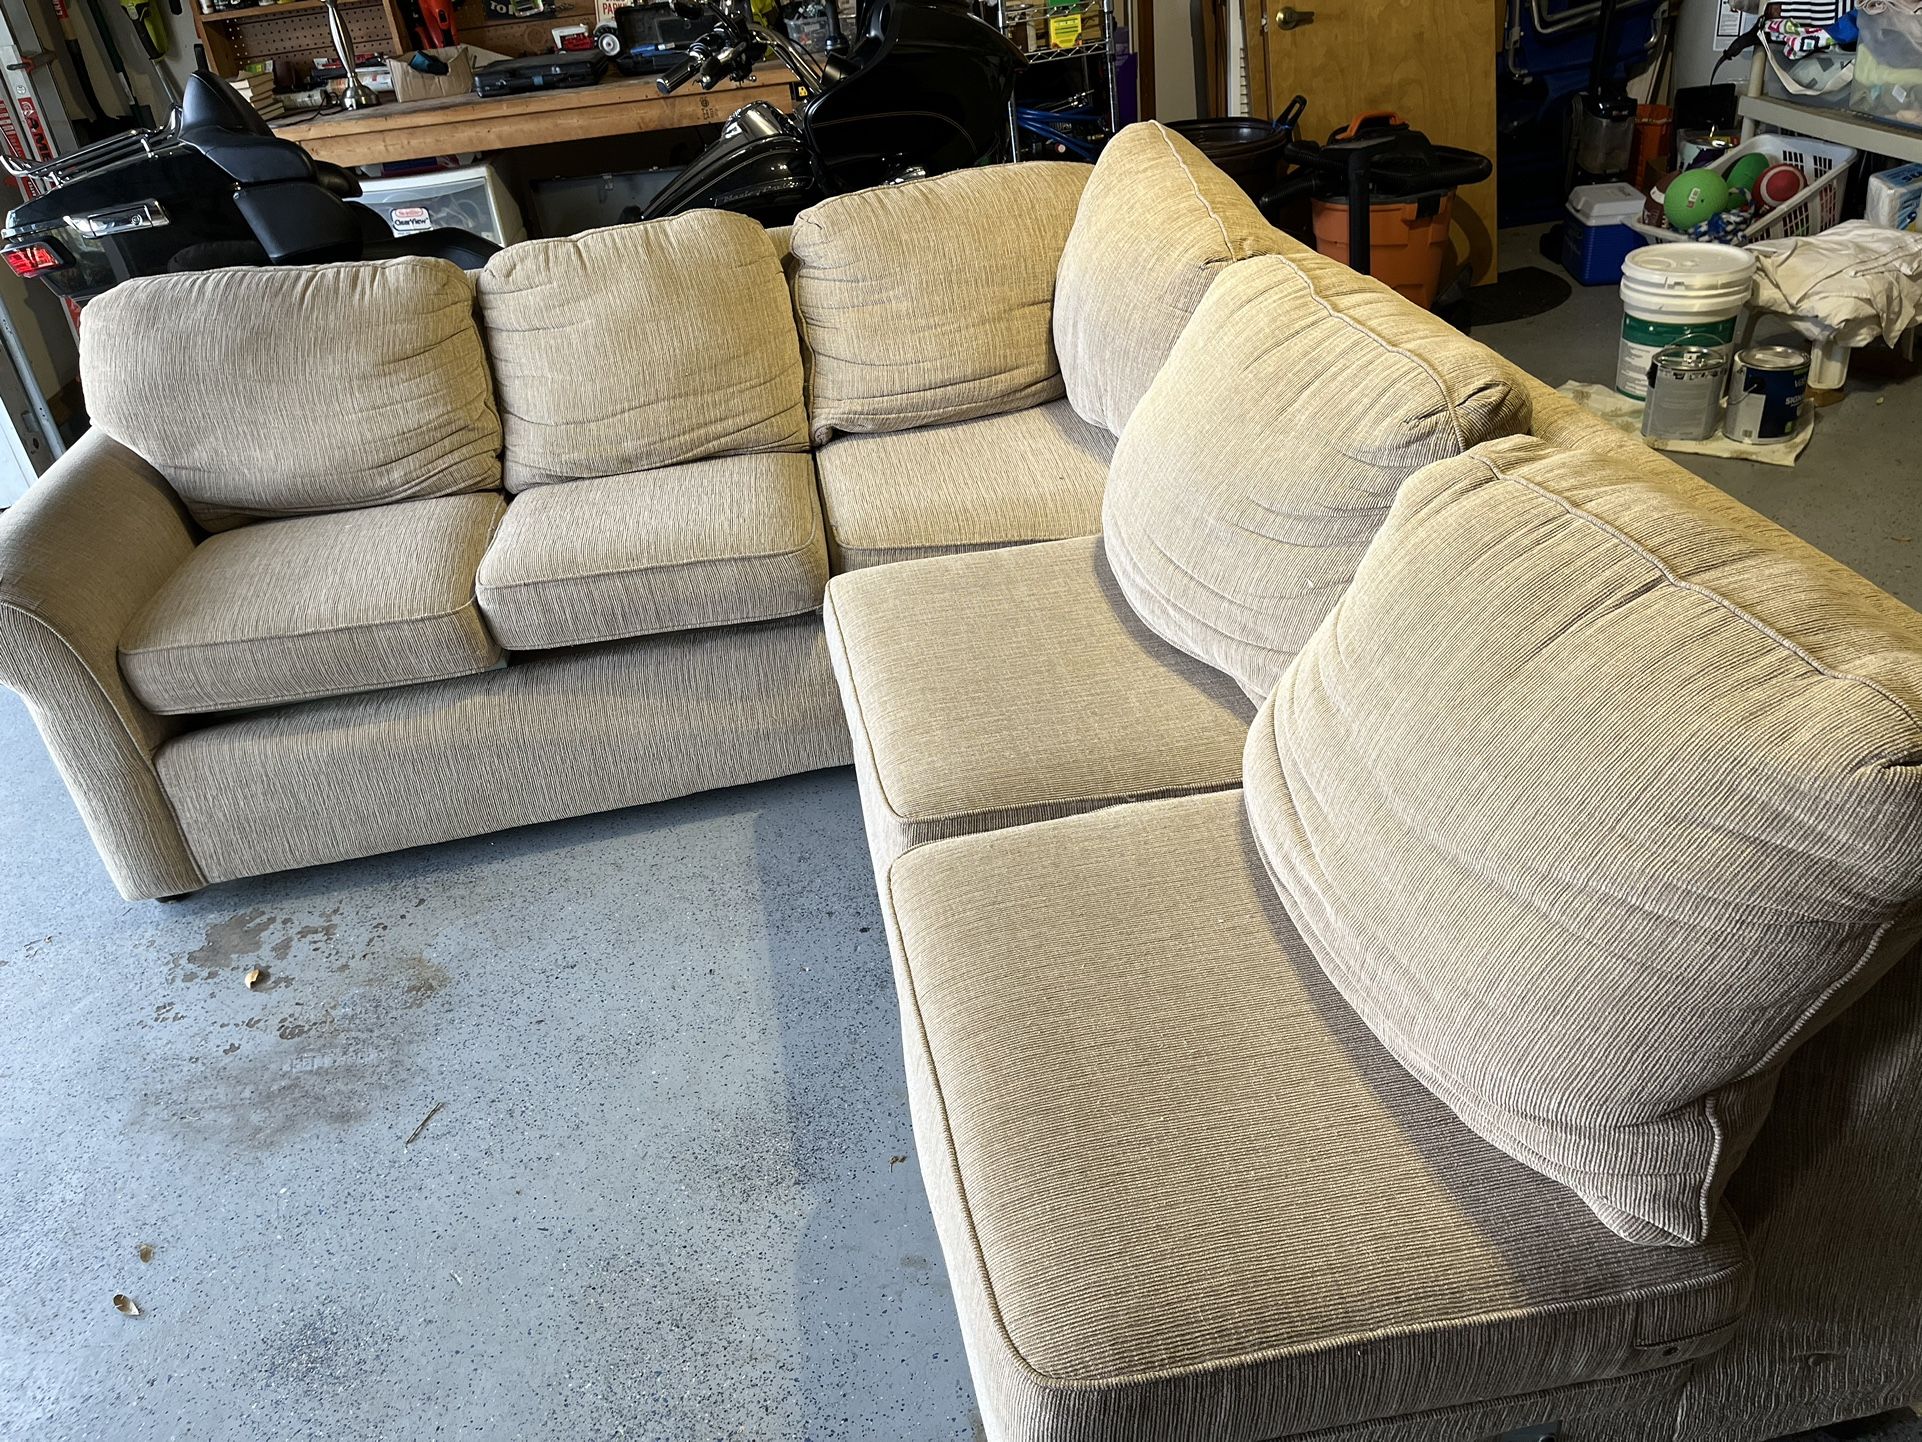 Sectional Beige Couch-FREE